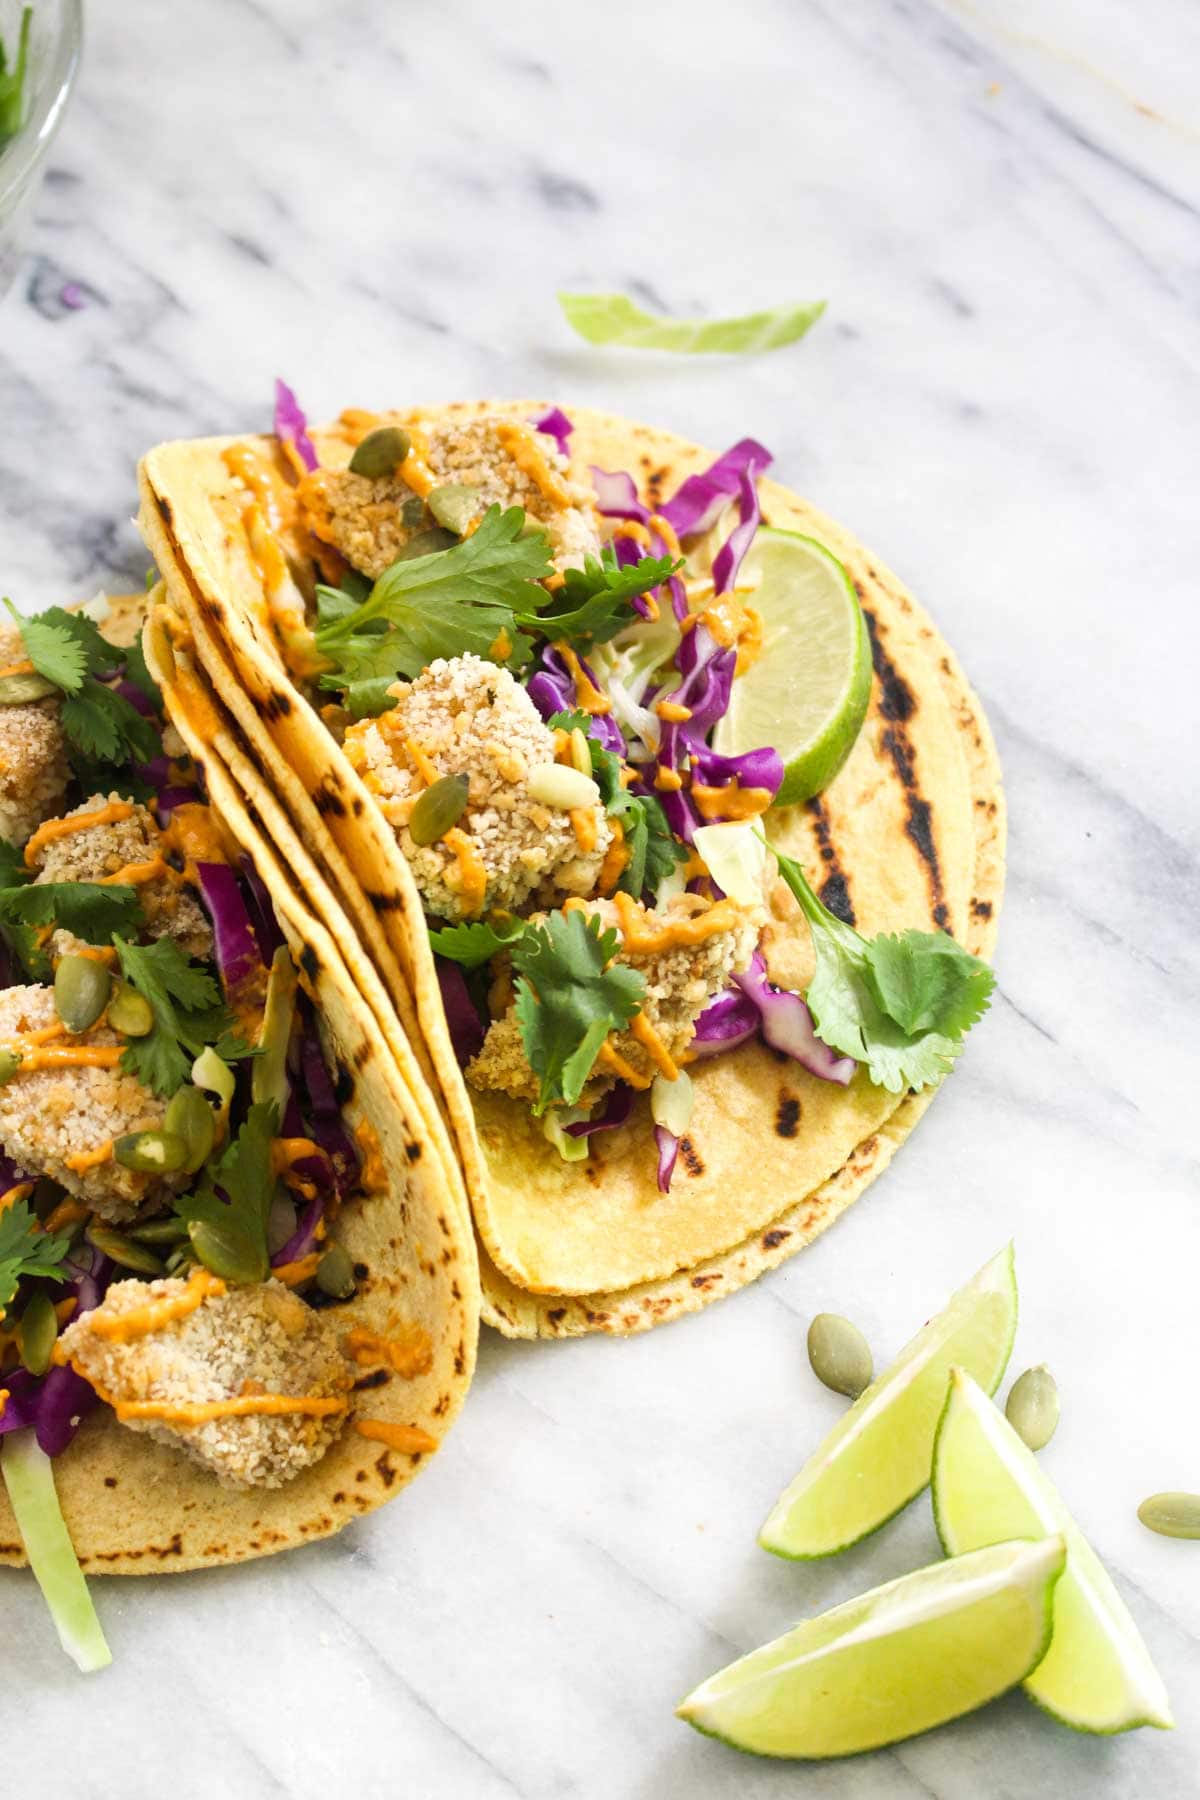 These Crispy Pumpkin Tacos will spice up taco Tuesday with their smokey Chipotle Lime Crema. This recipe is vegan, gluten free, and healthy! | CatchingSeeds.com